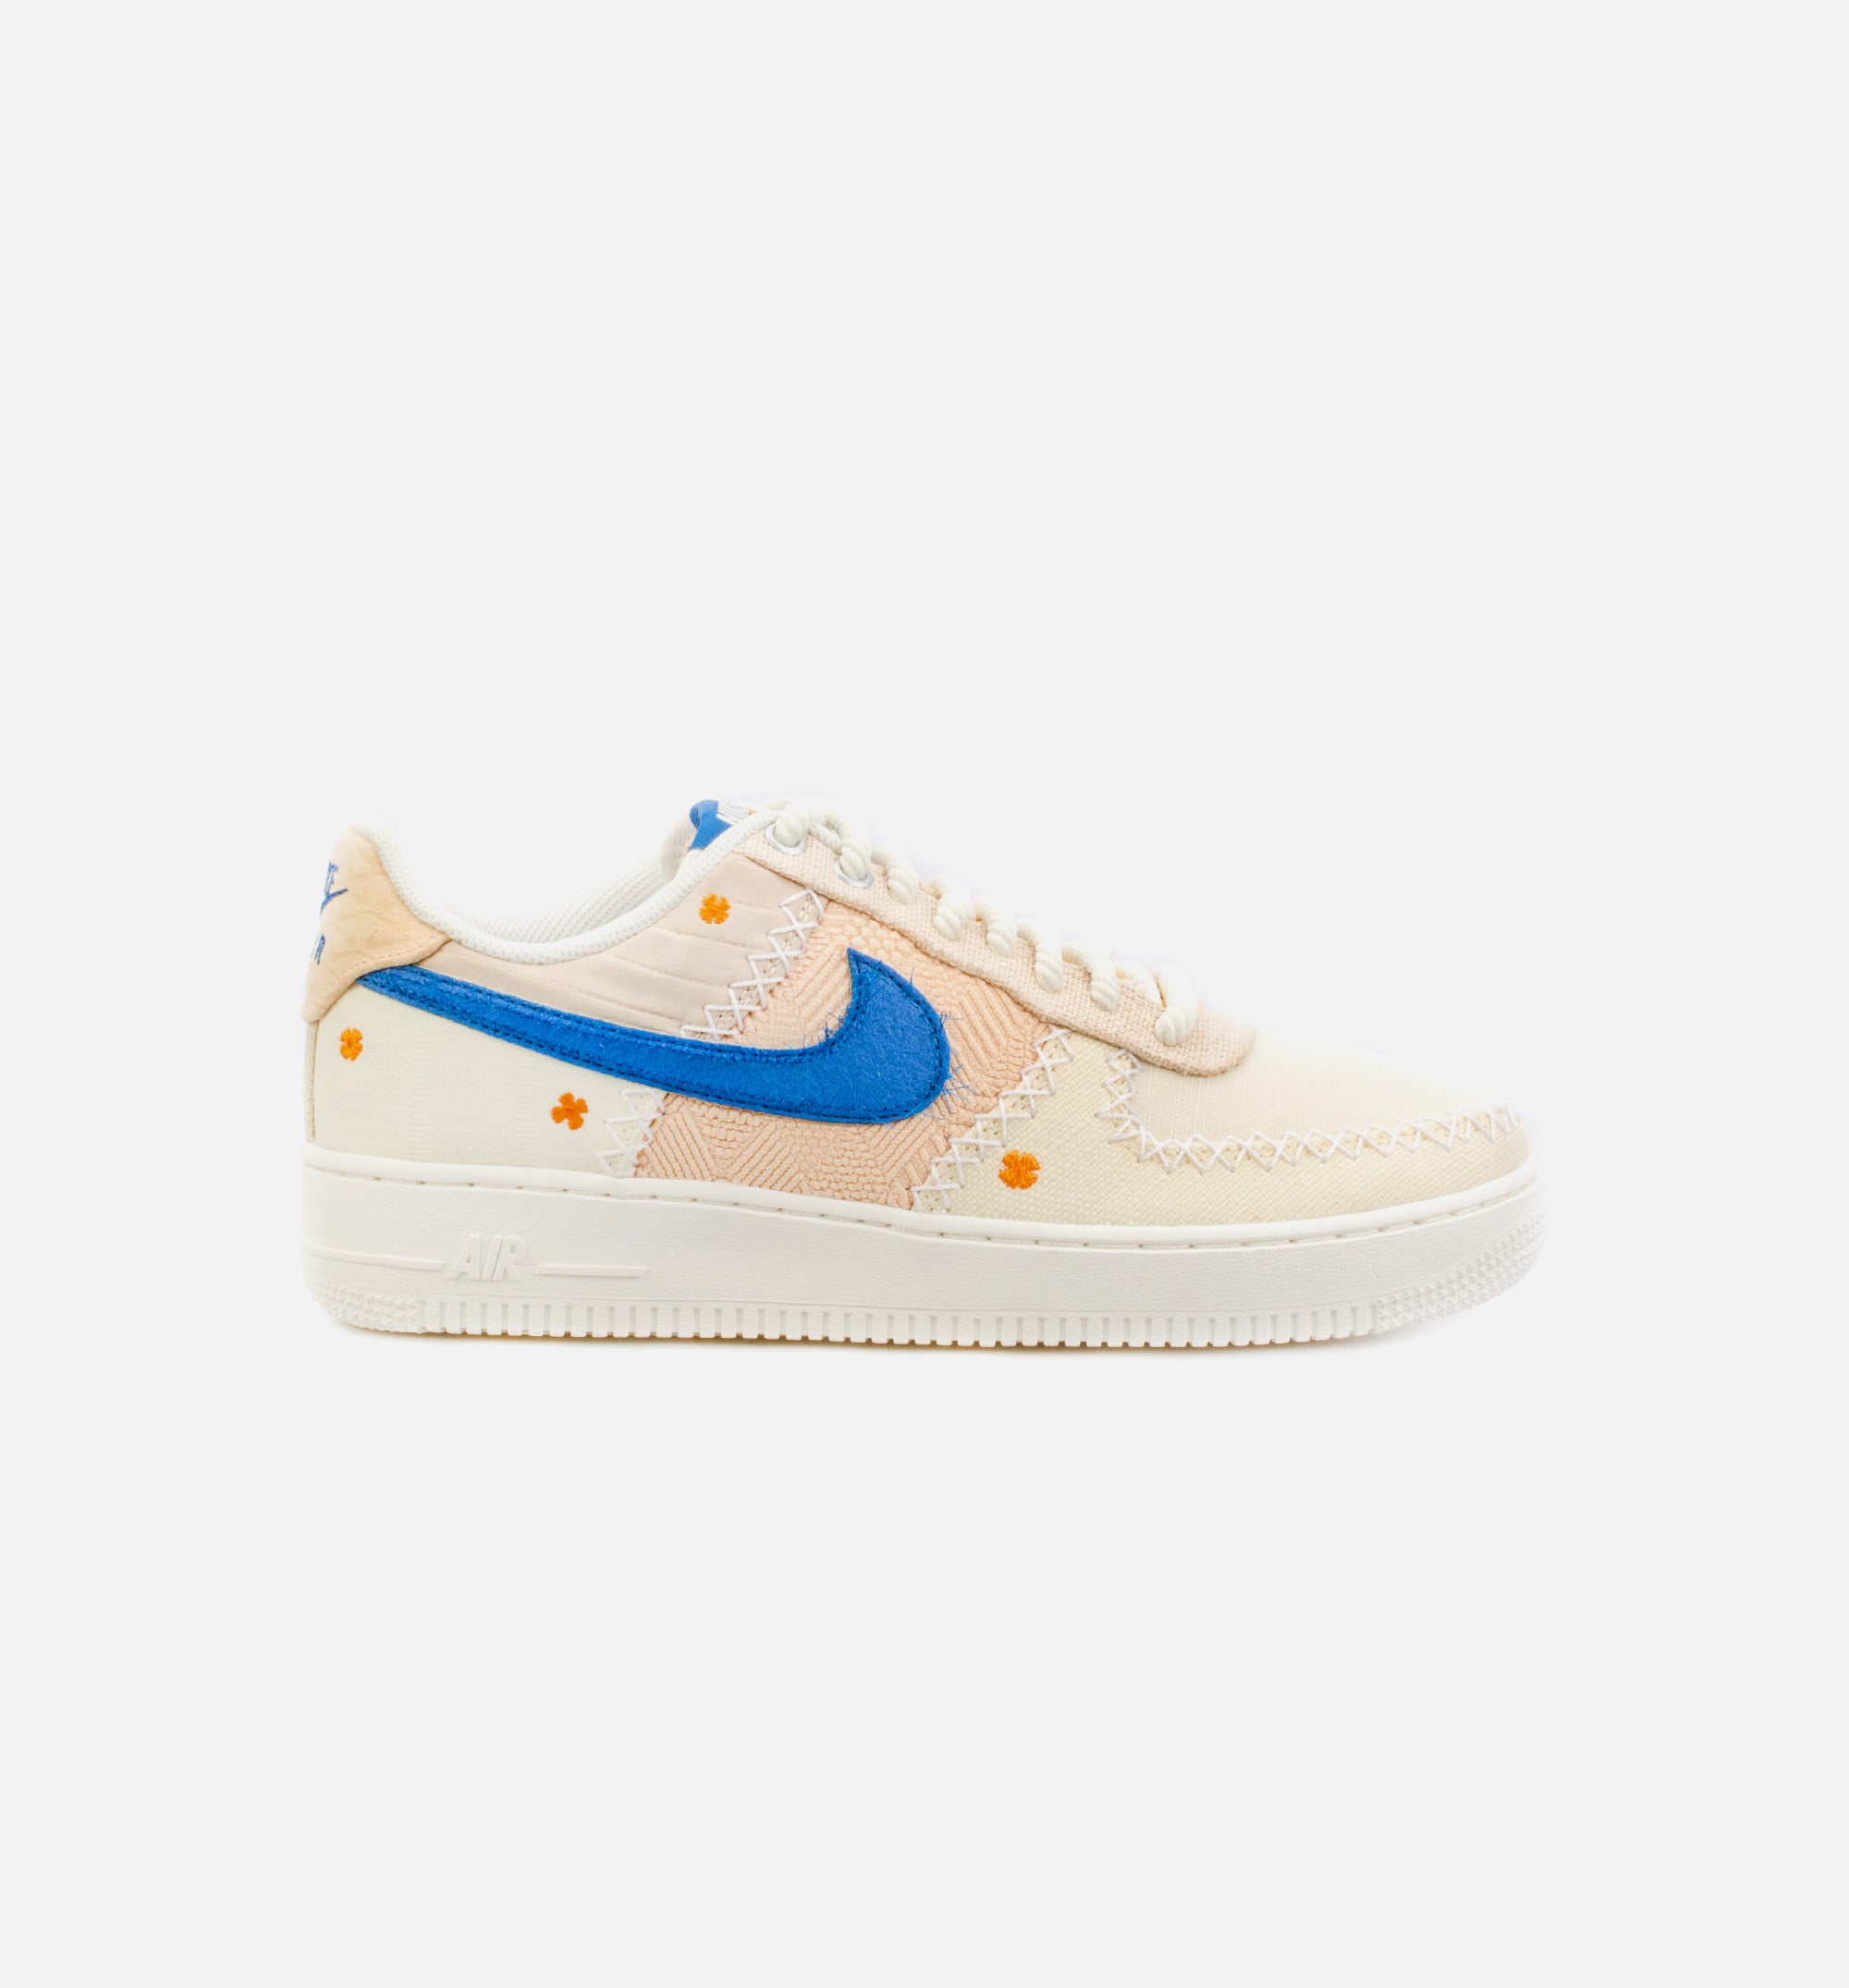 Nike Air Force 1 '07 LV8 What The LA